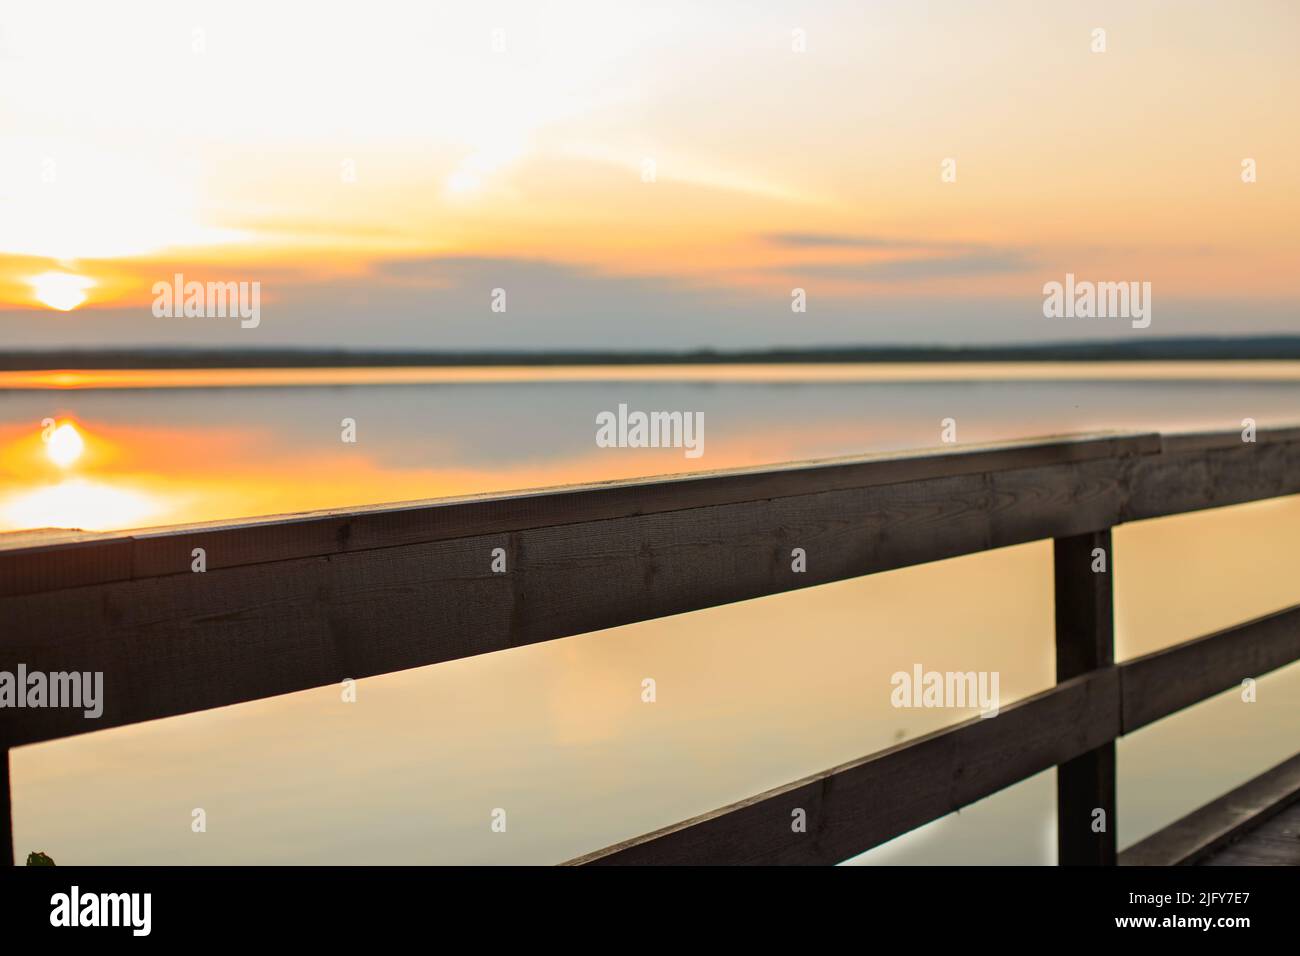 sunset on a wooden pier. Autumn landscape with falling leaves. Stock Photo